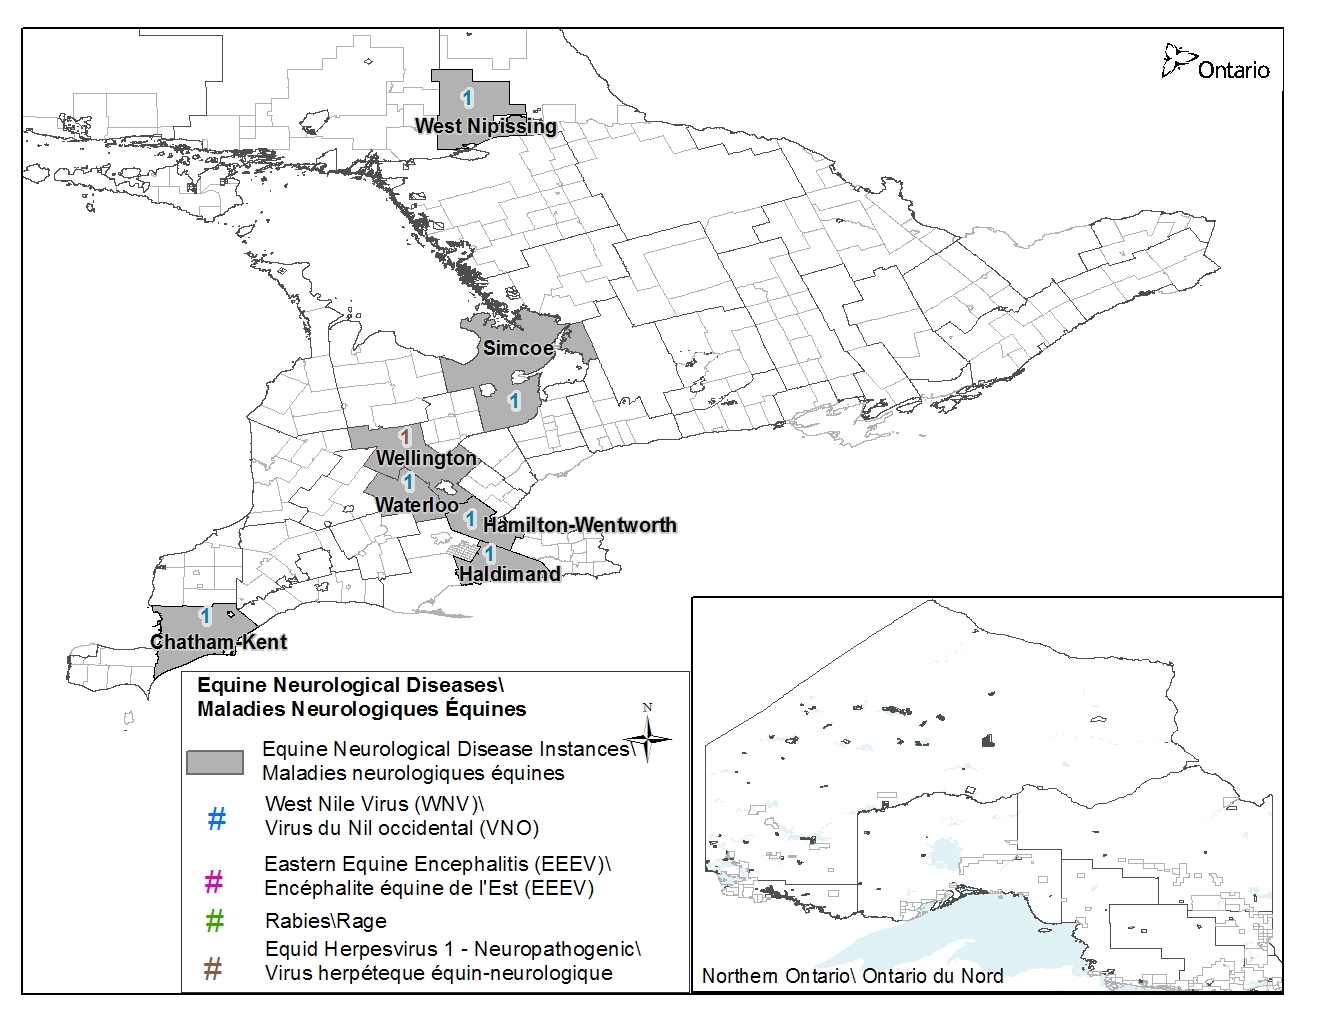 A map depicting the locations of equine neurological disease in Ontario in 2012